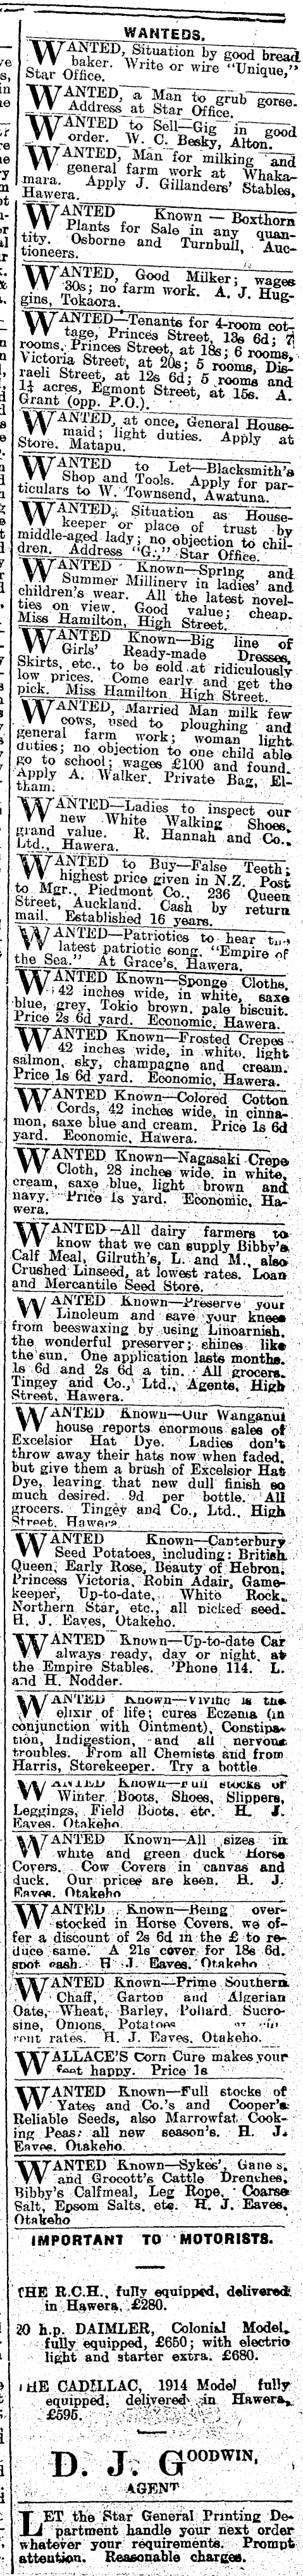 Papers Past, Newspapers, Hawera & Normanby Star